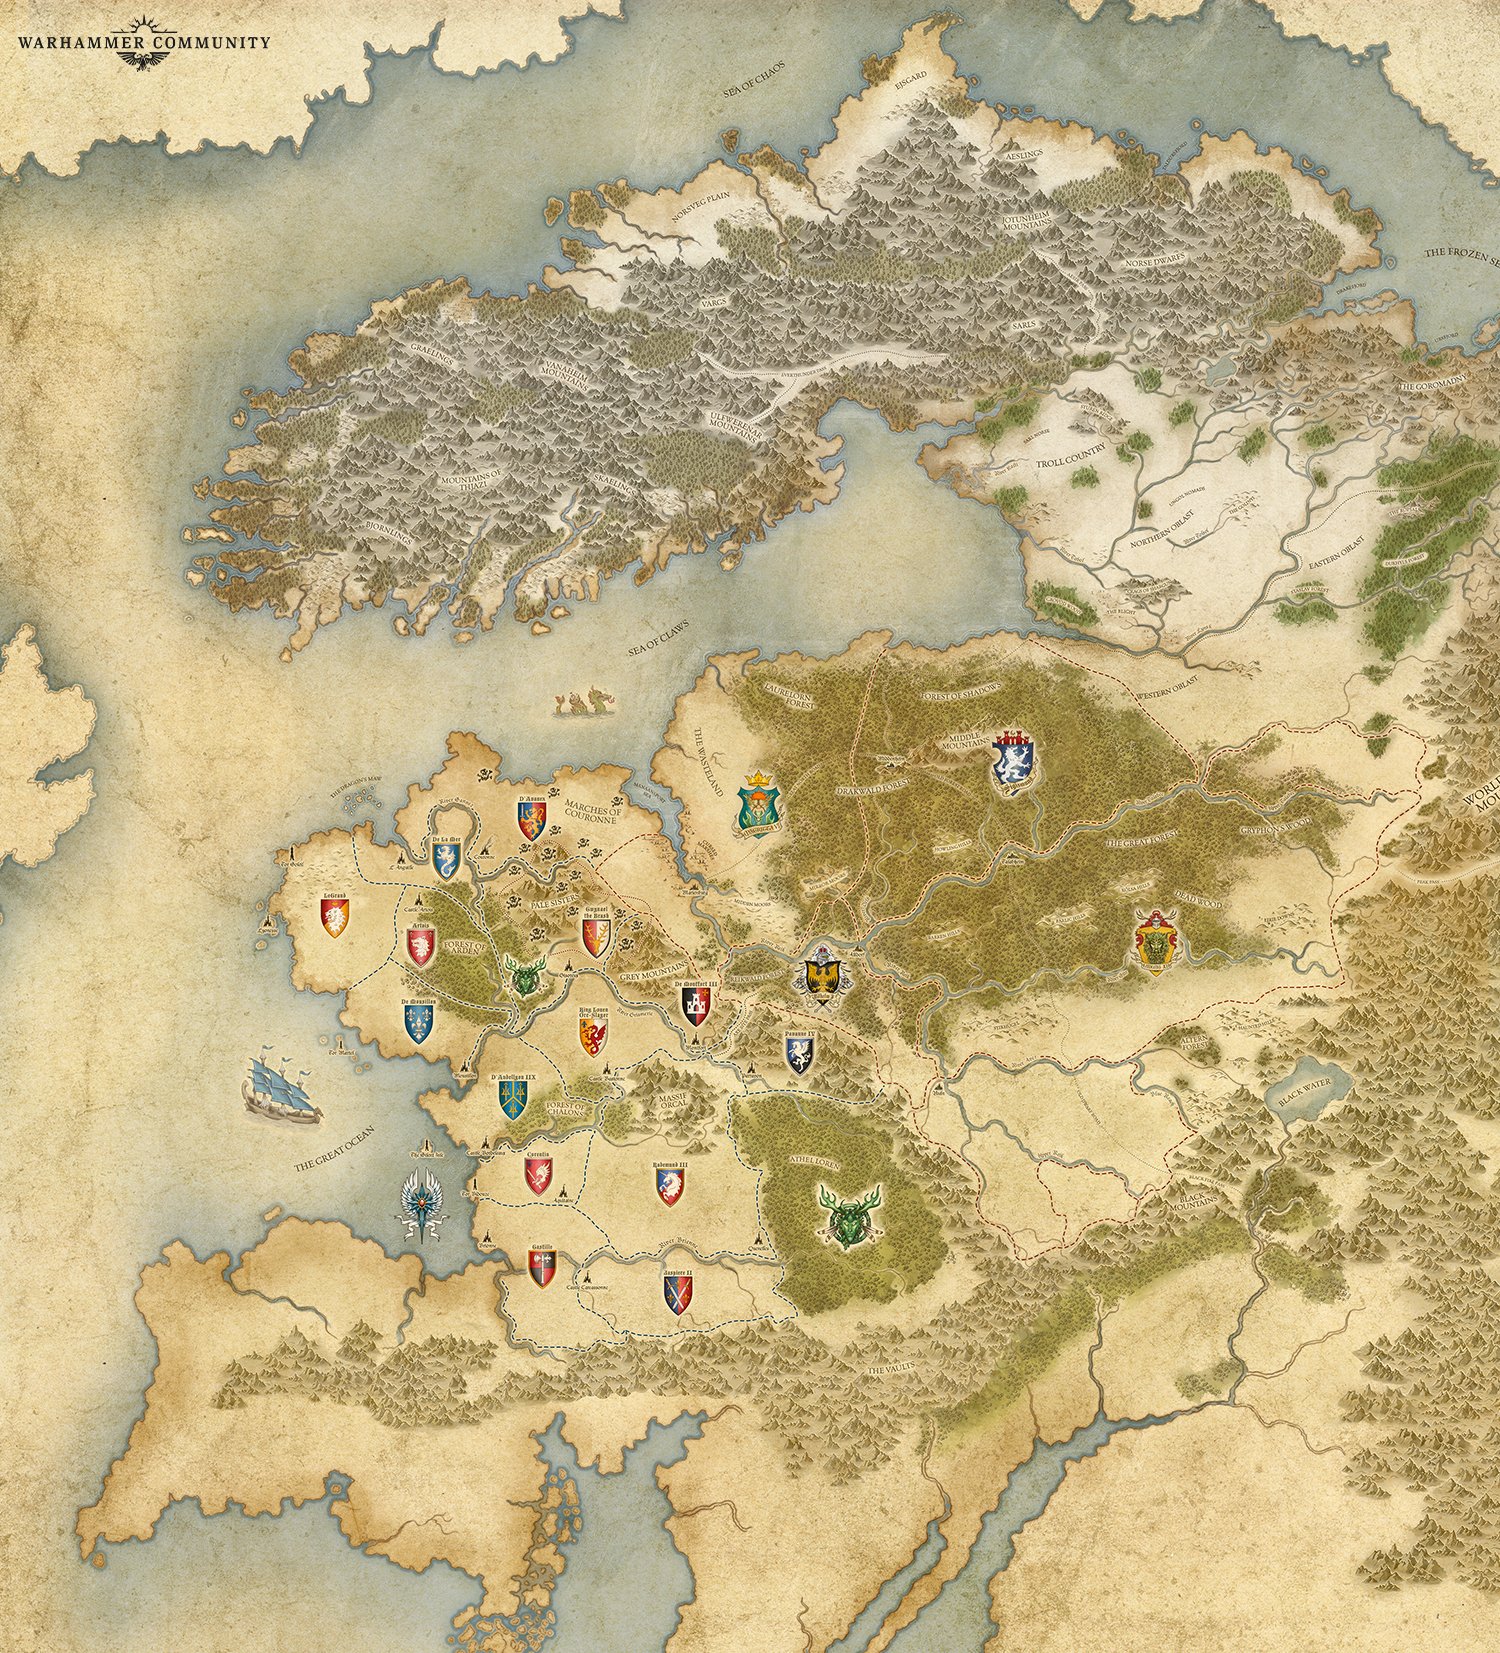 Warhammer The Old World Bretonnia map, a fantasy realm similar in shape to Europe